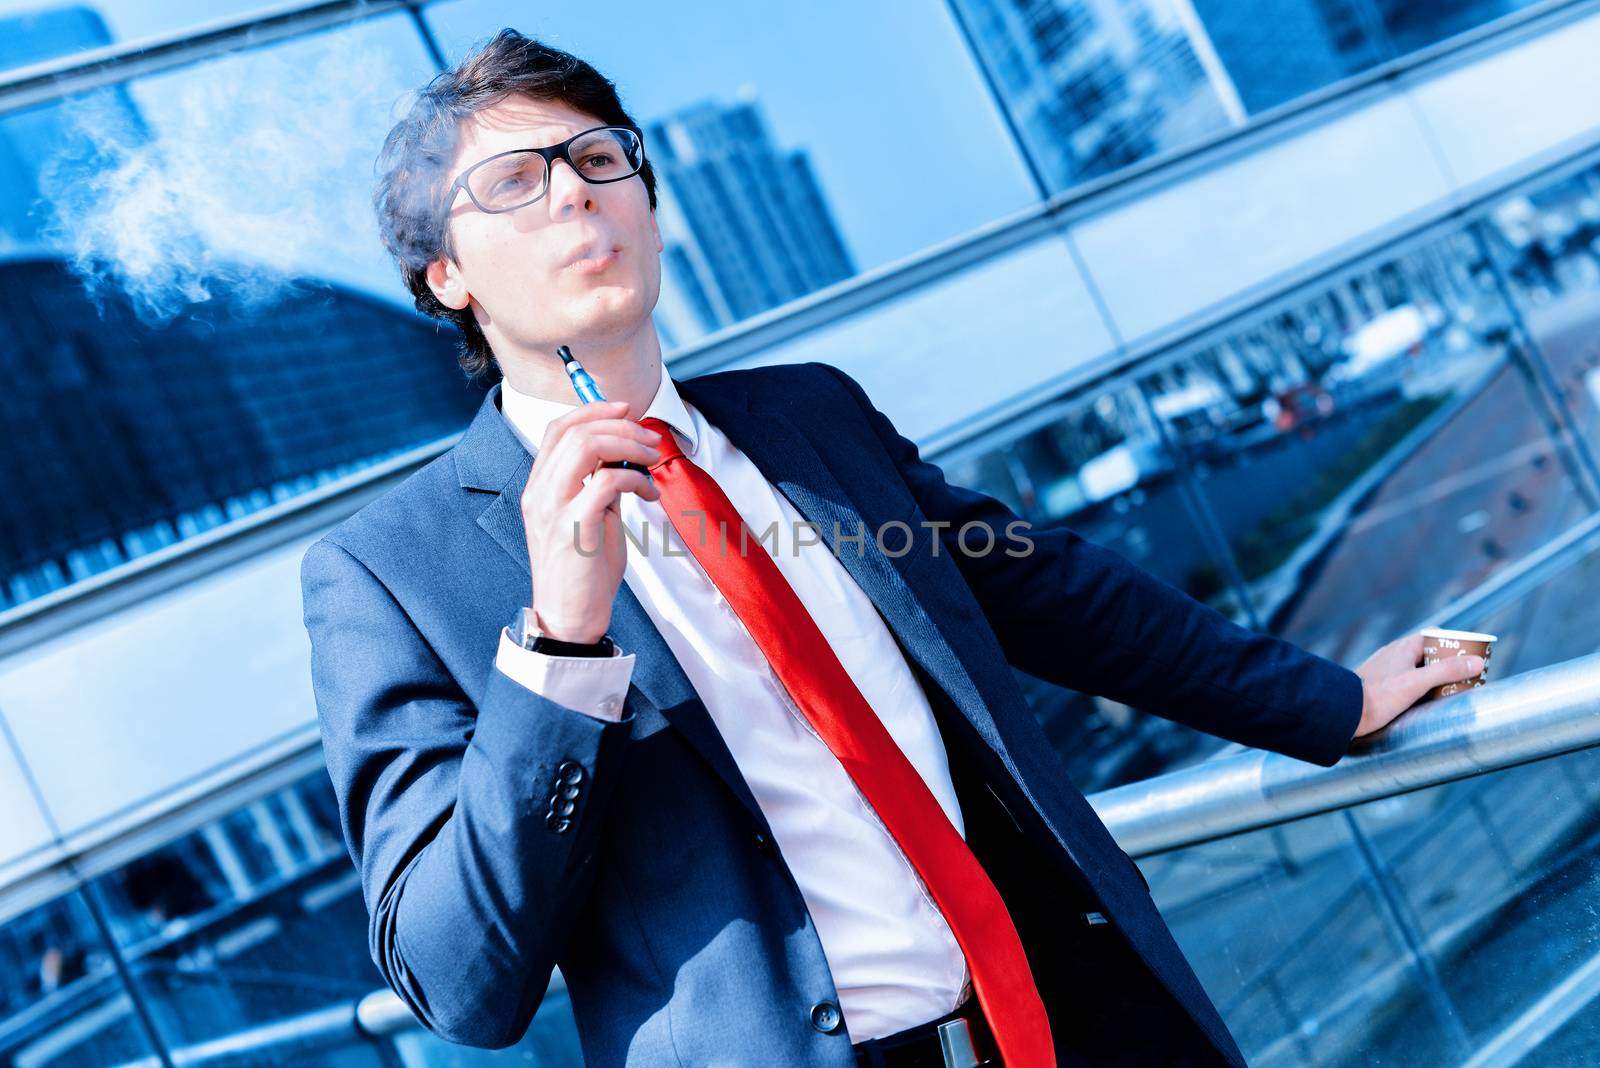 Cute young adult man inhaling from an electronic cigarette